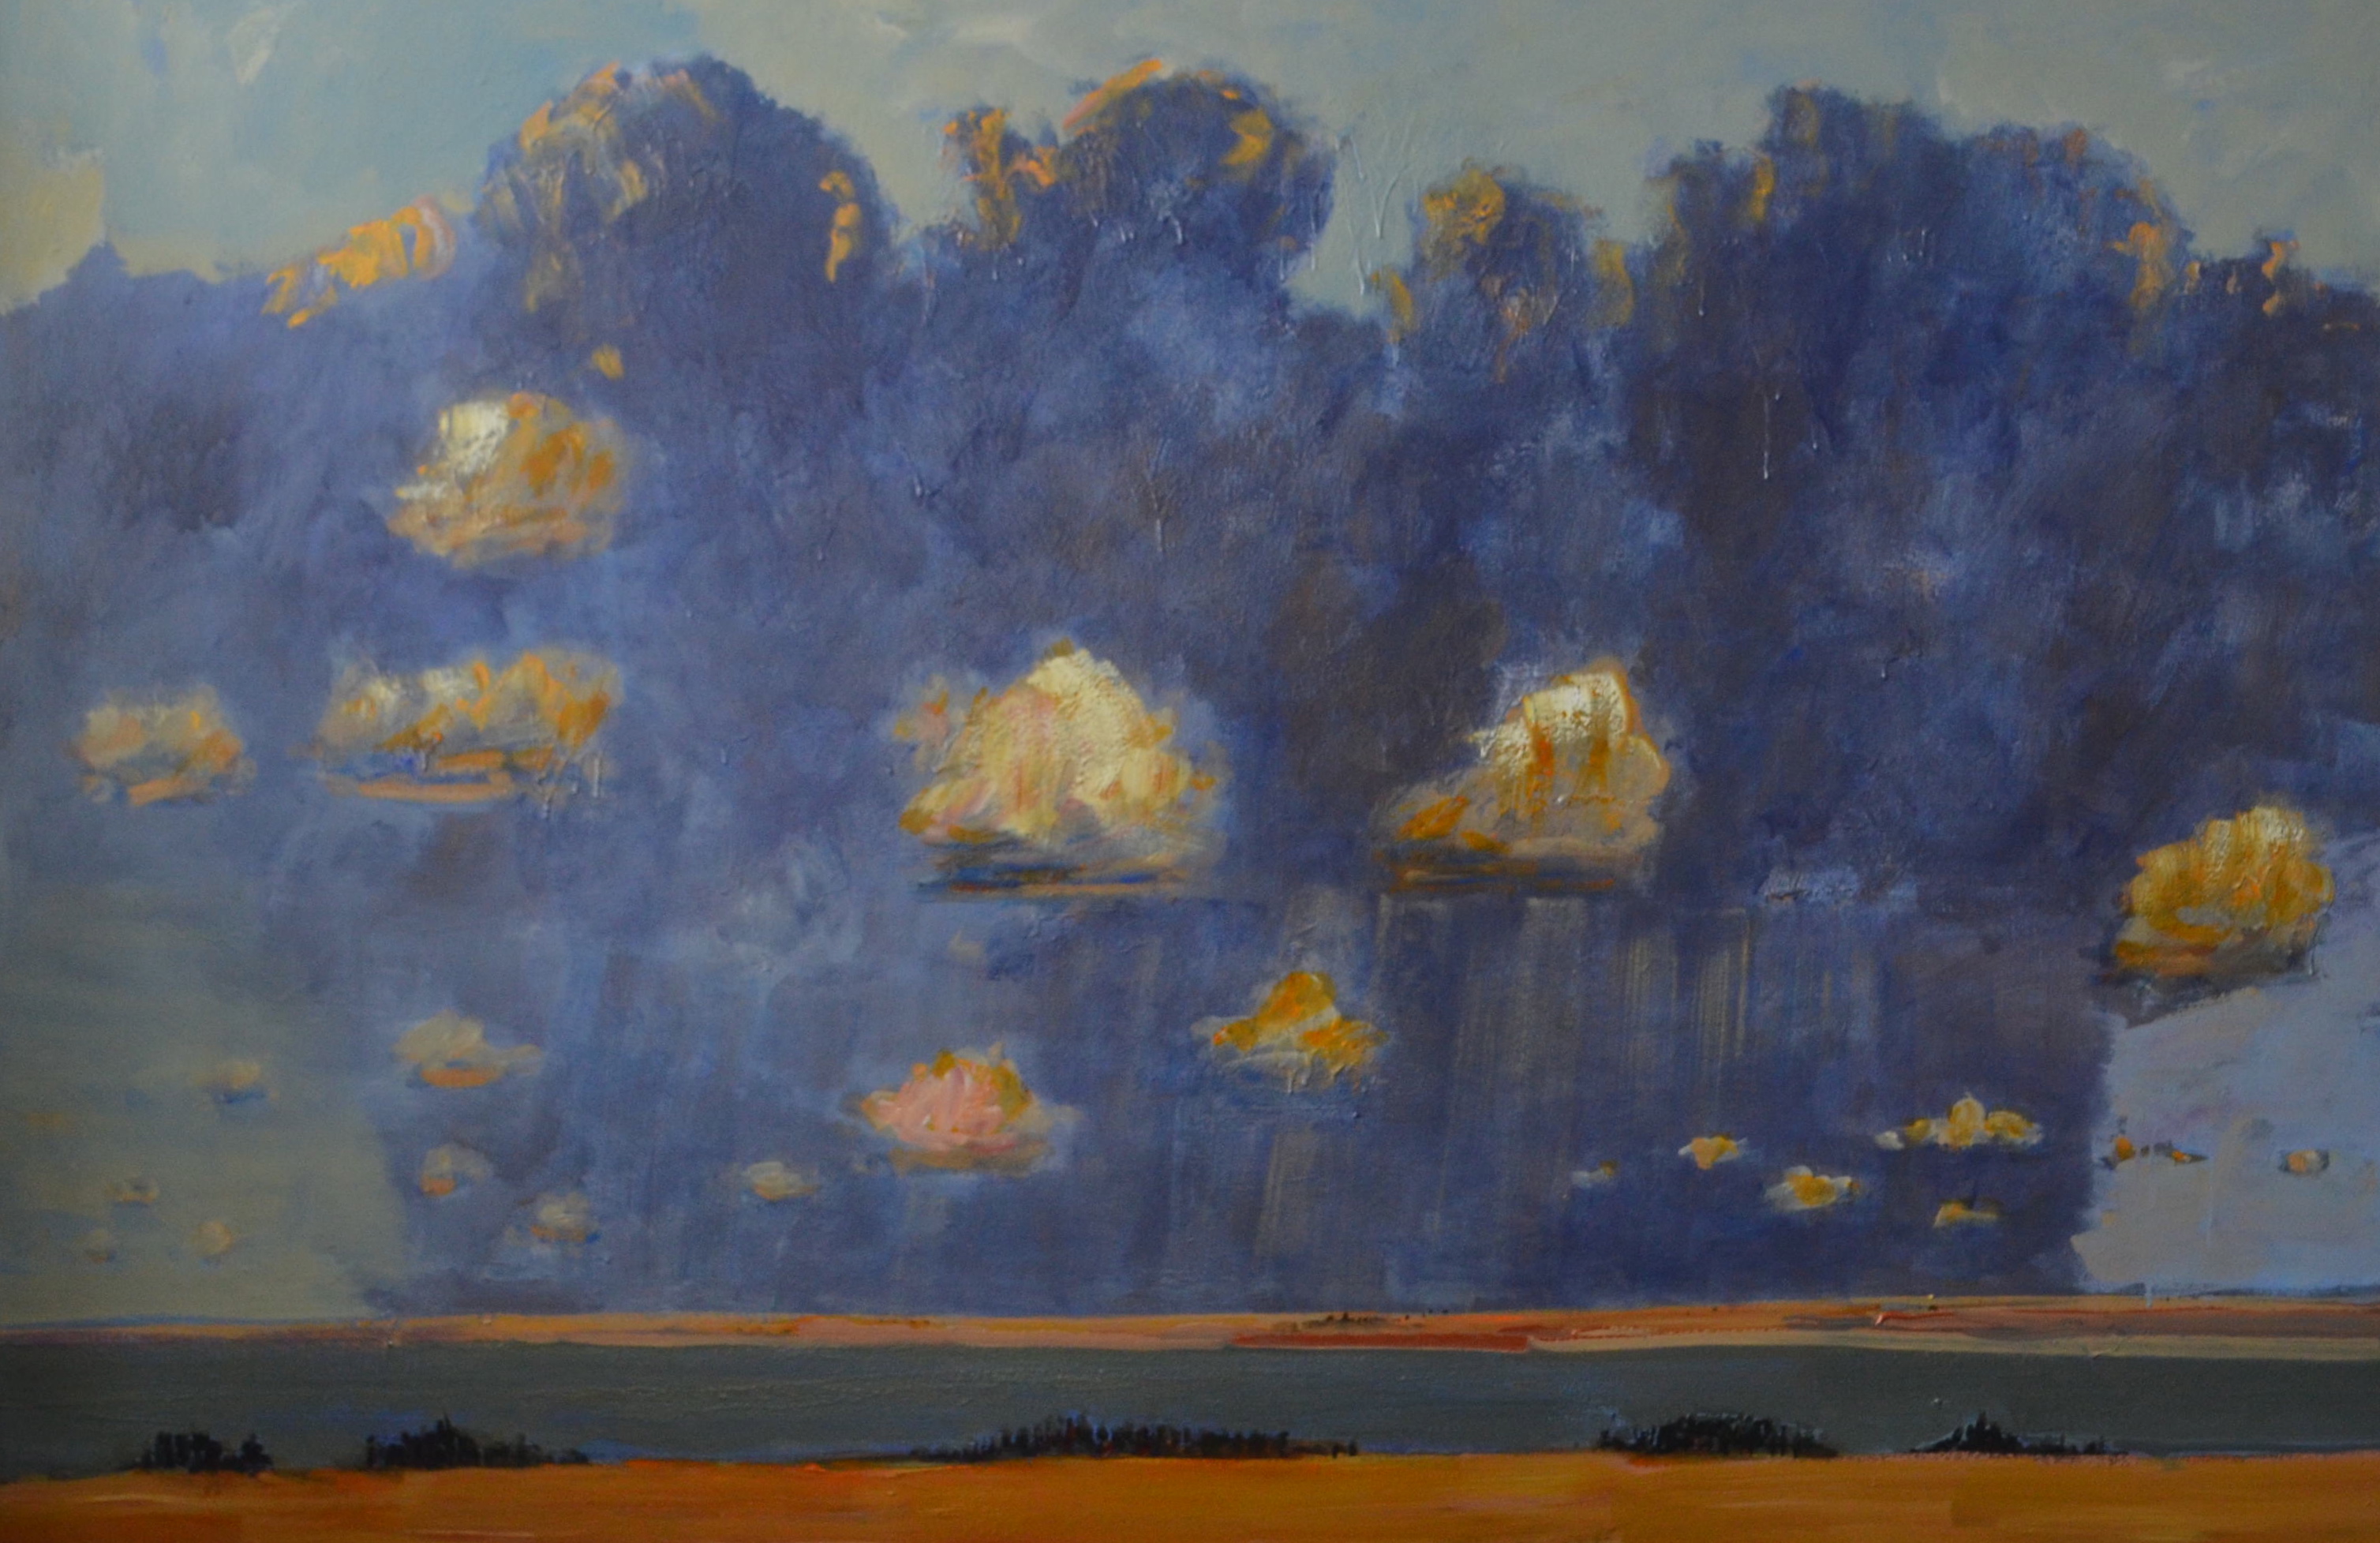 Big-Cloud-Formation-Over-Kasba-Lake-2014-Acrylic-on-canvas-66in-x-96in